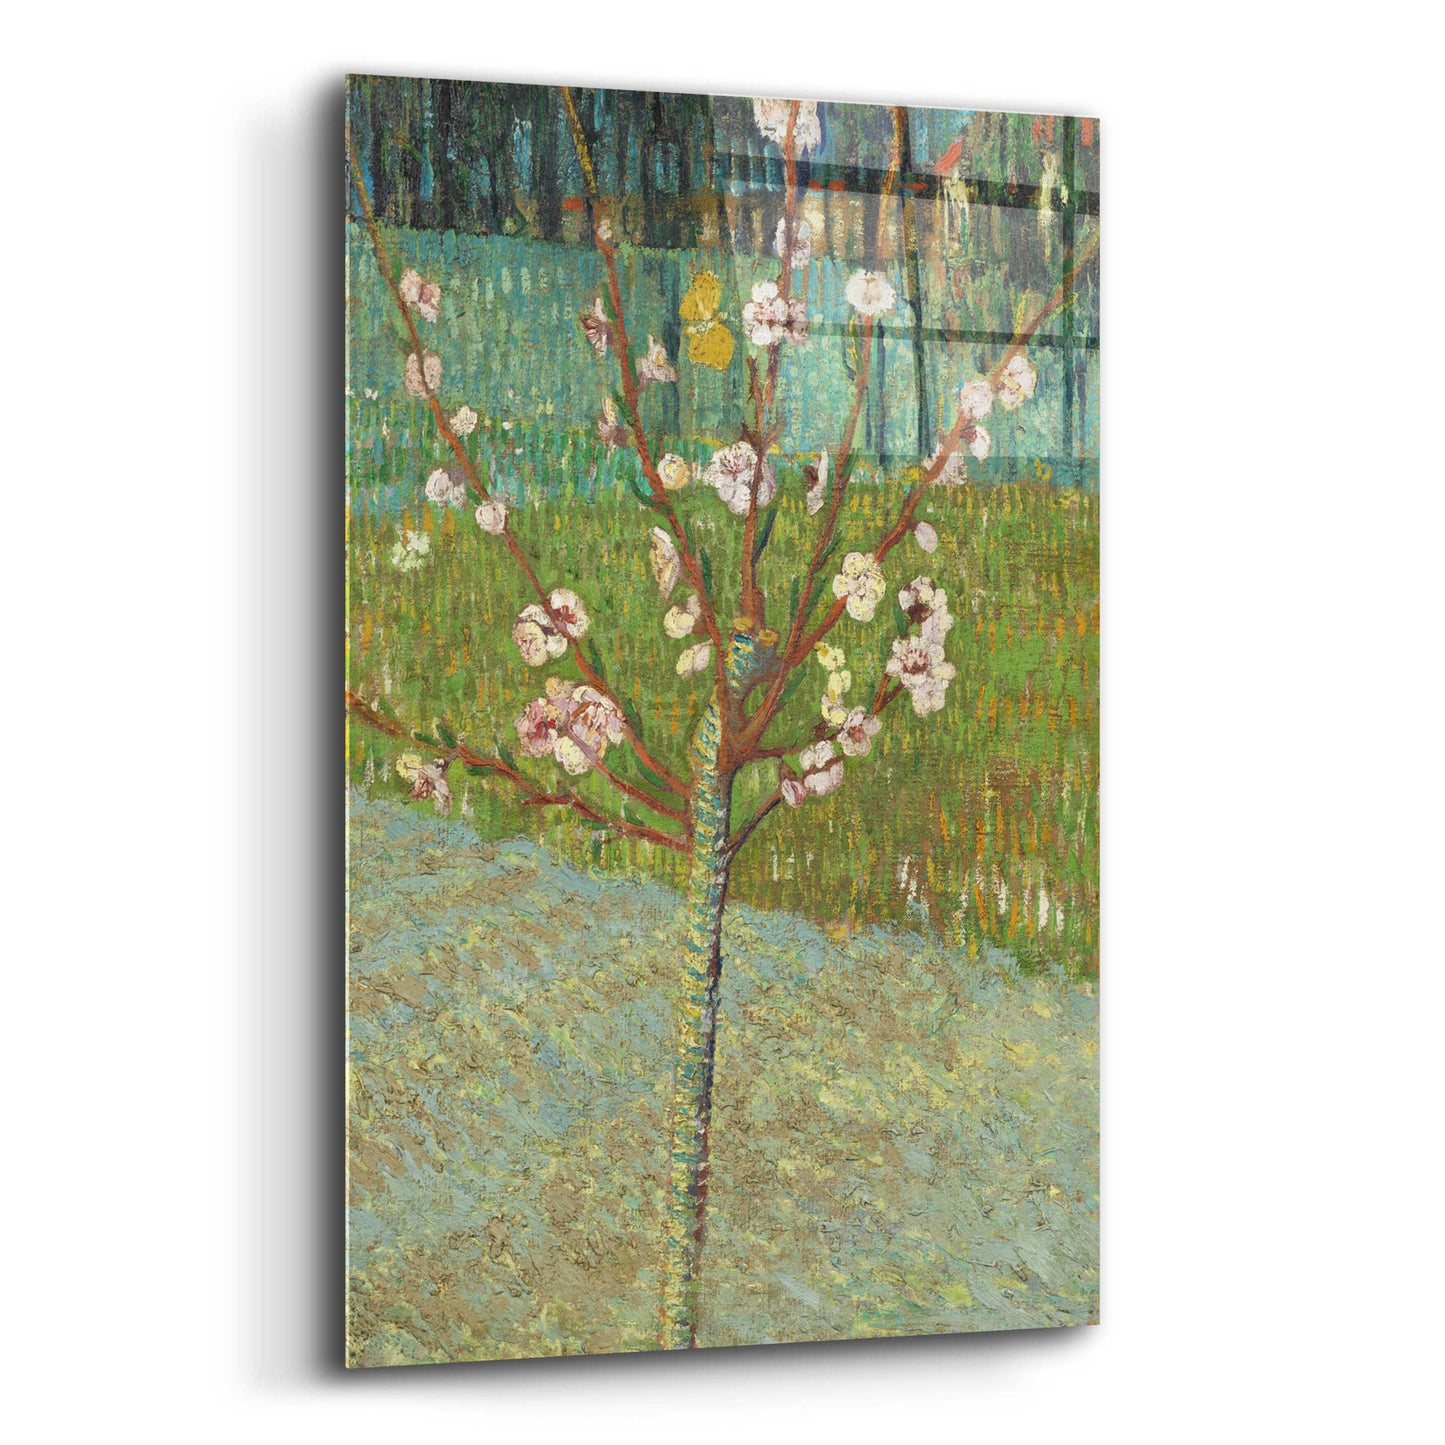 Epic Art 'Peach Tree In Blossom' by Vincent Van Gogh, Acrylic Glass Wall Art,12x16